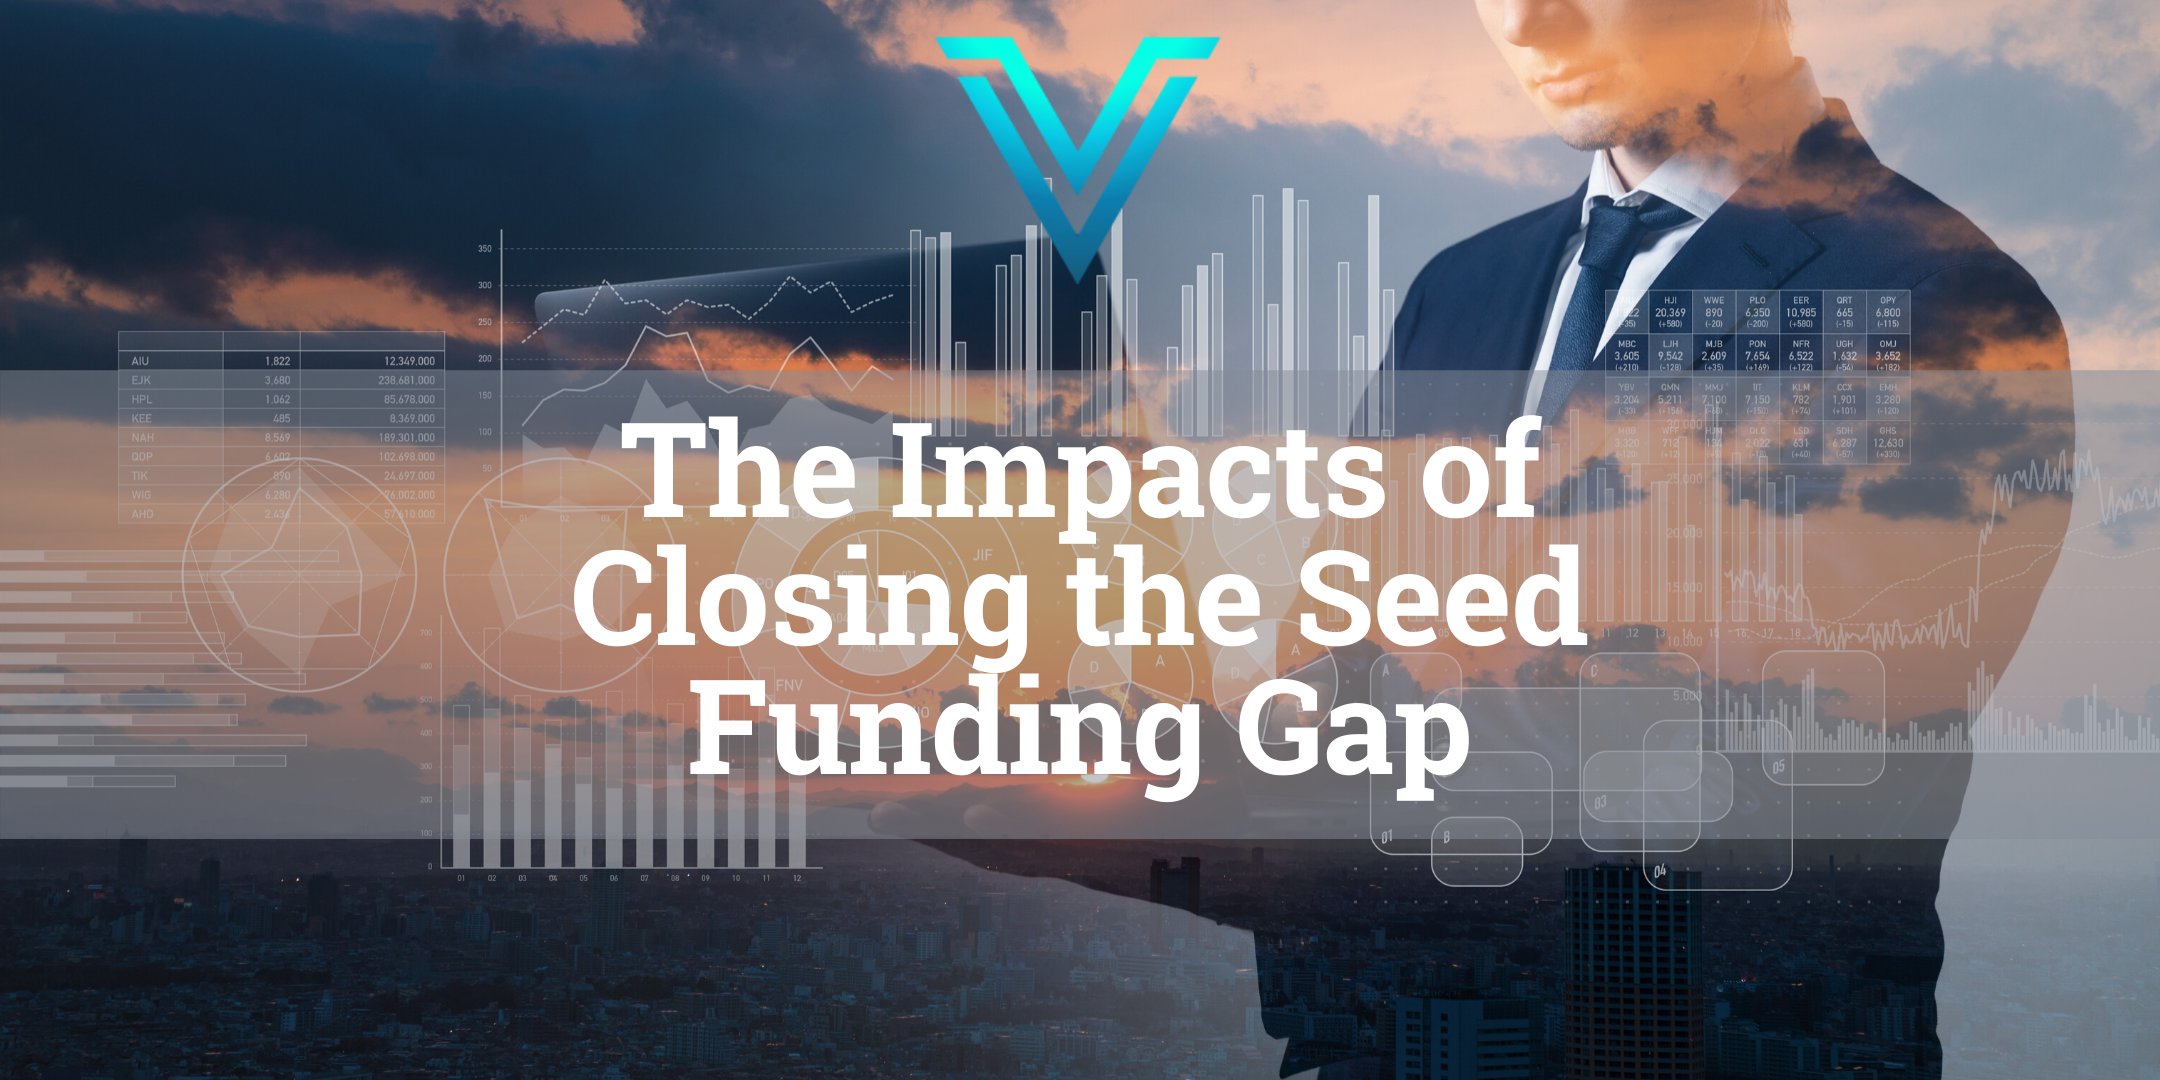 The Impact of Closing the Southeastern Seed Funding Gap